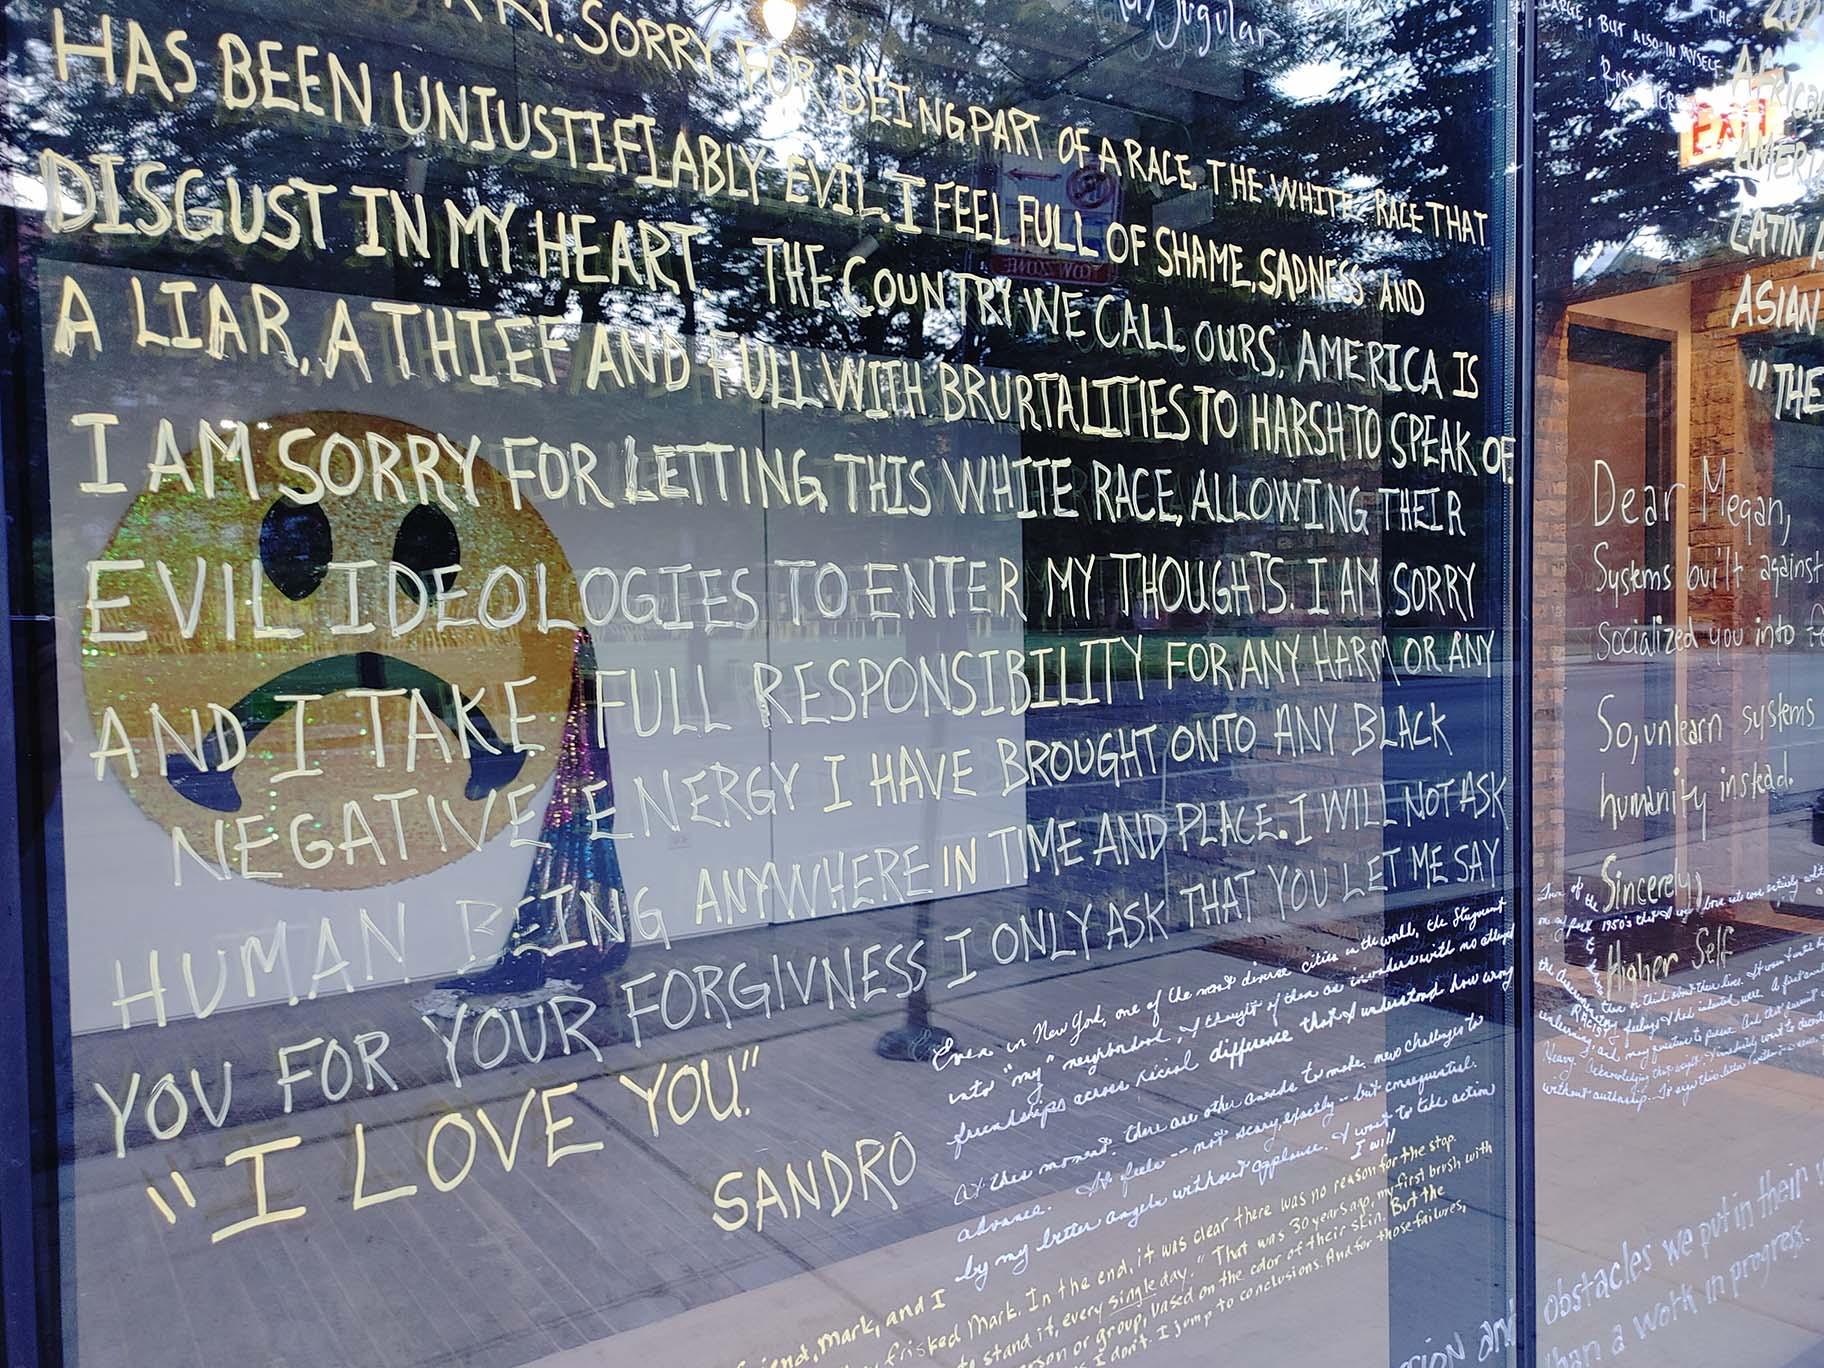 The completed installation “Letters to the World” on the windows of Facility on Sunday, July 12, 2020. (Erica Gunderson / WTTW News)